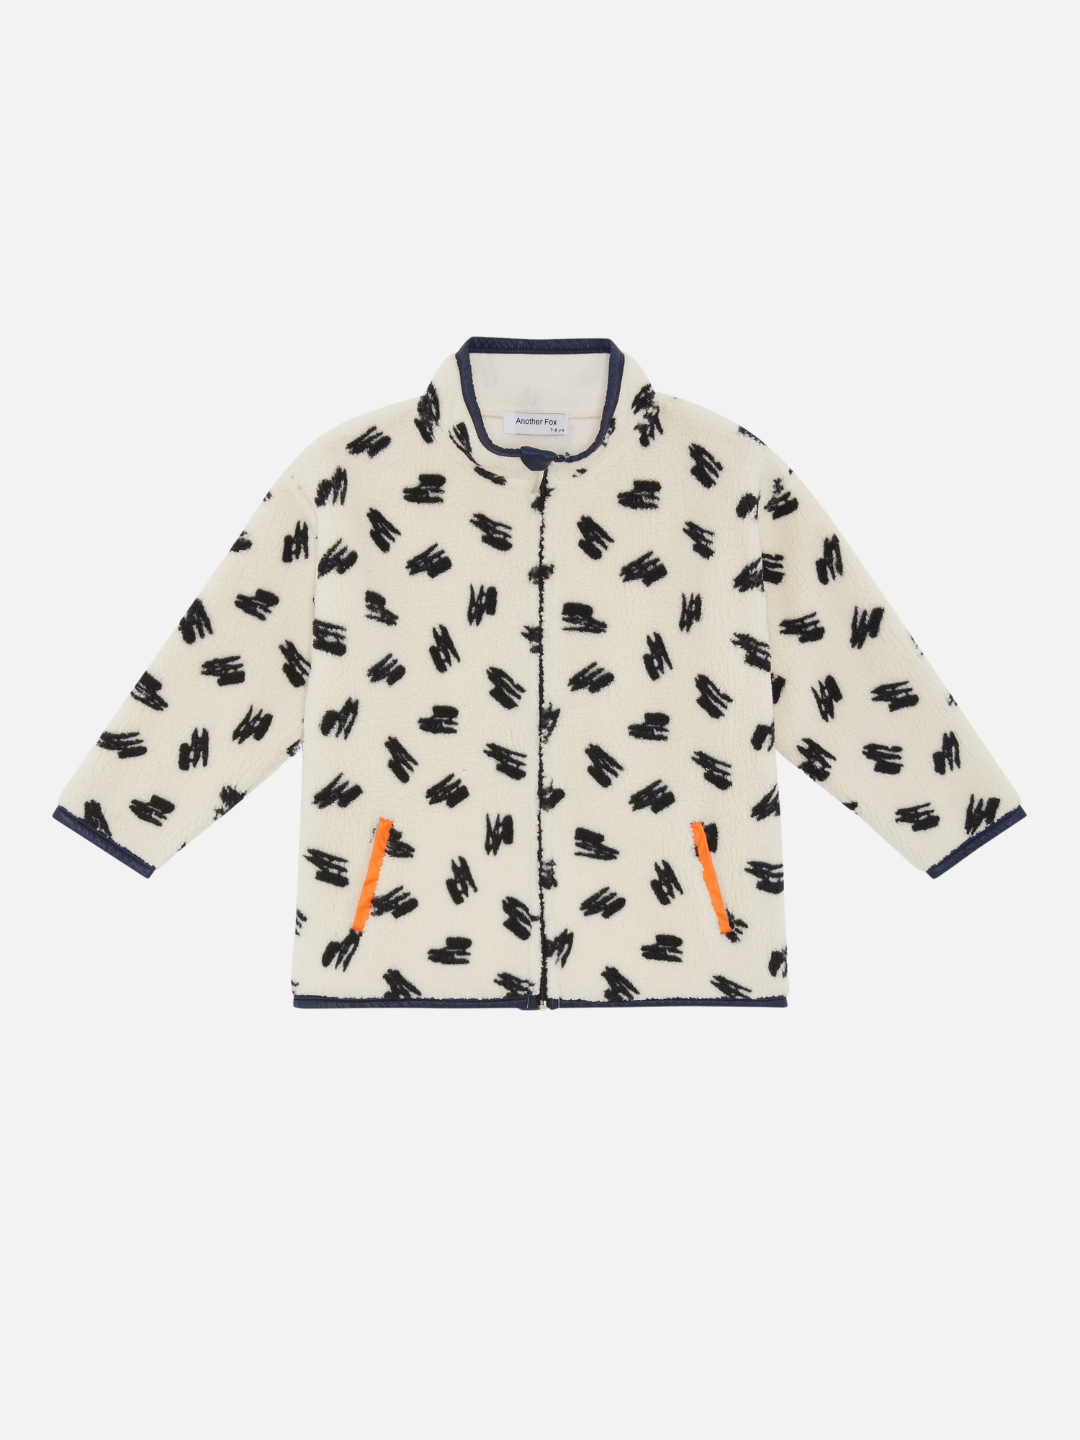 A kids' jacket in a pattern of black scribbles on a cream background with orange pocket  bindings